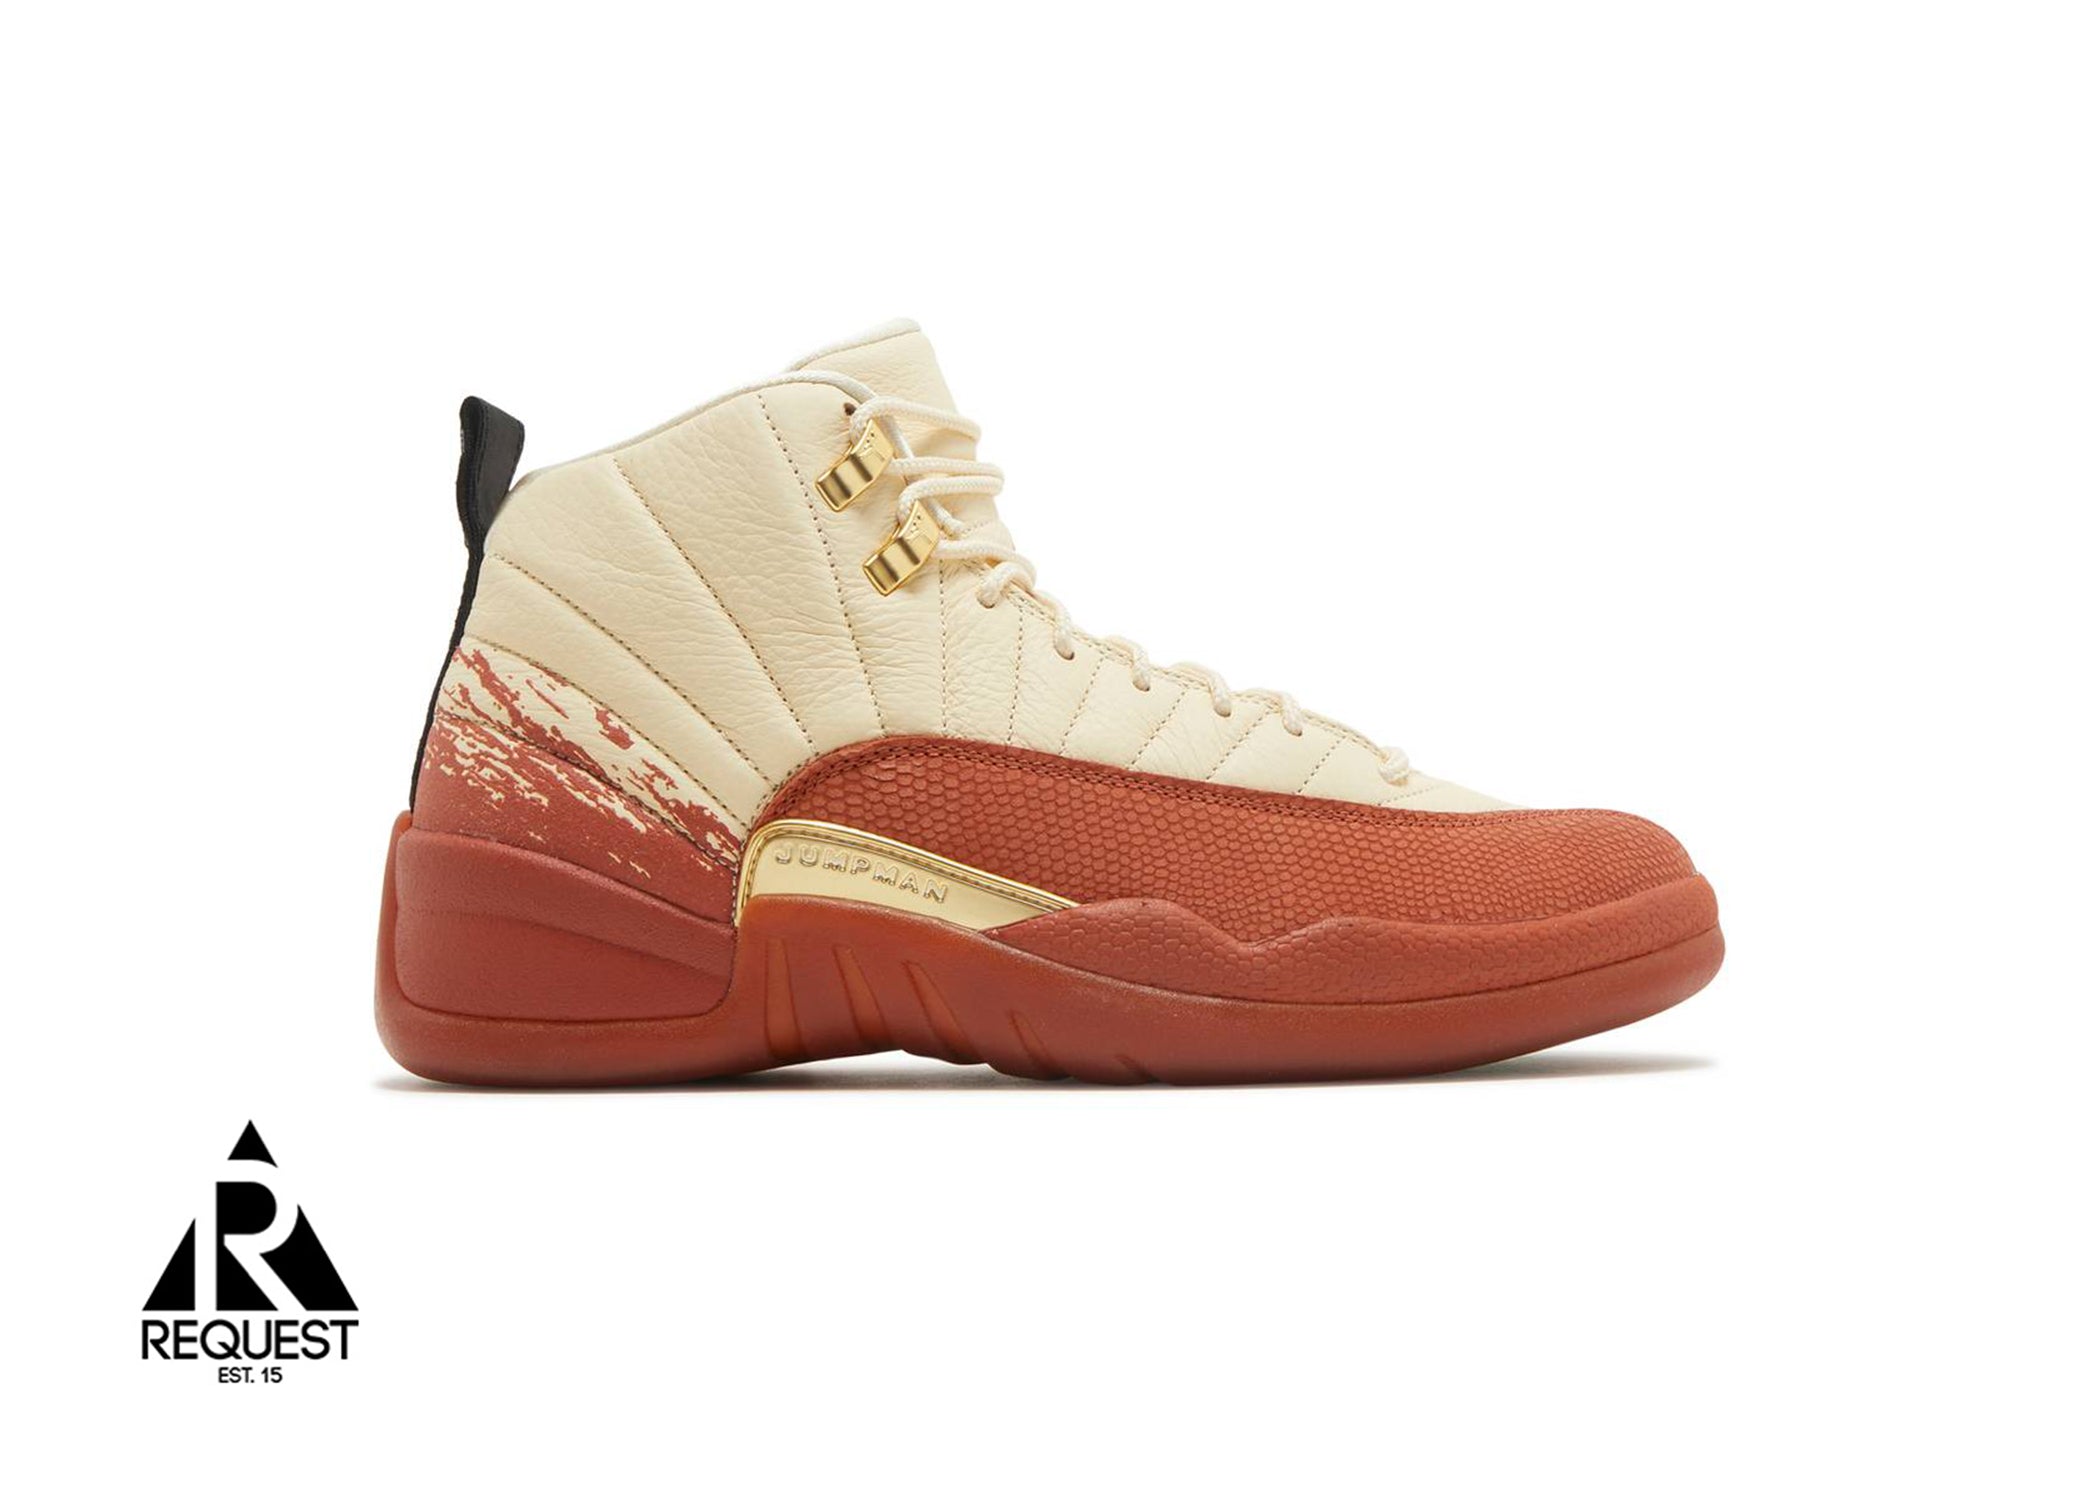 Air Jordan 12 Retro Eastside Golf "Out of the Clay"